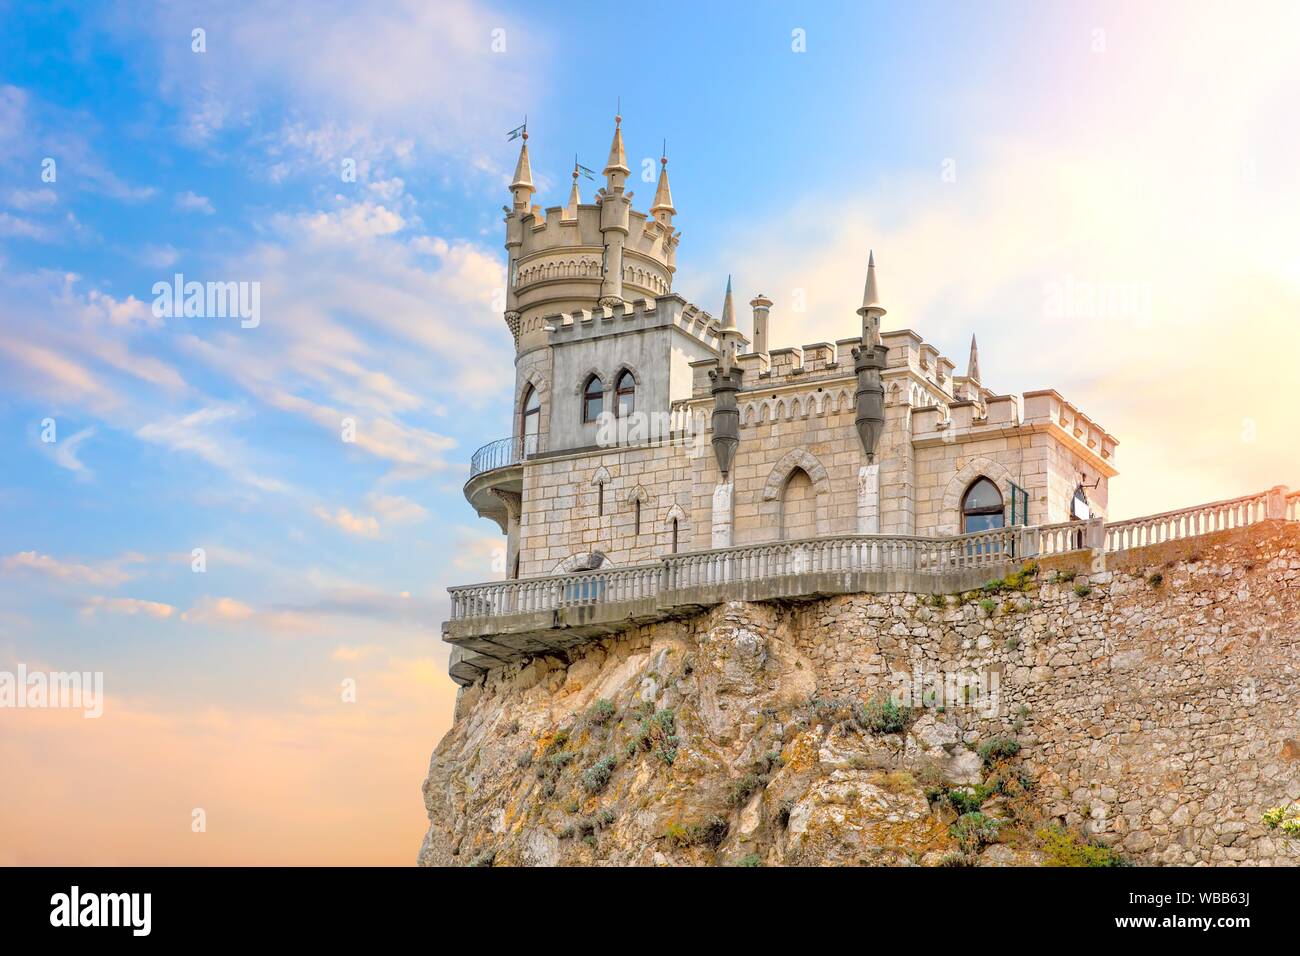 Beautiful view on the Swallow Nest Castle in the sky, Crimea, Ukraine. Stock Photo